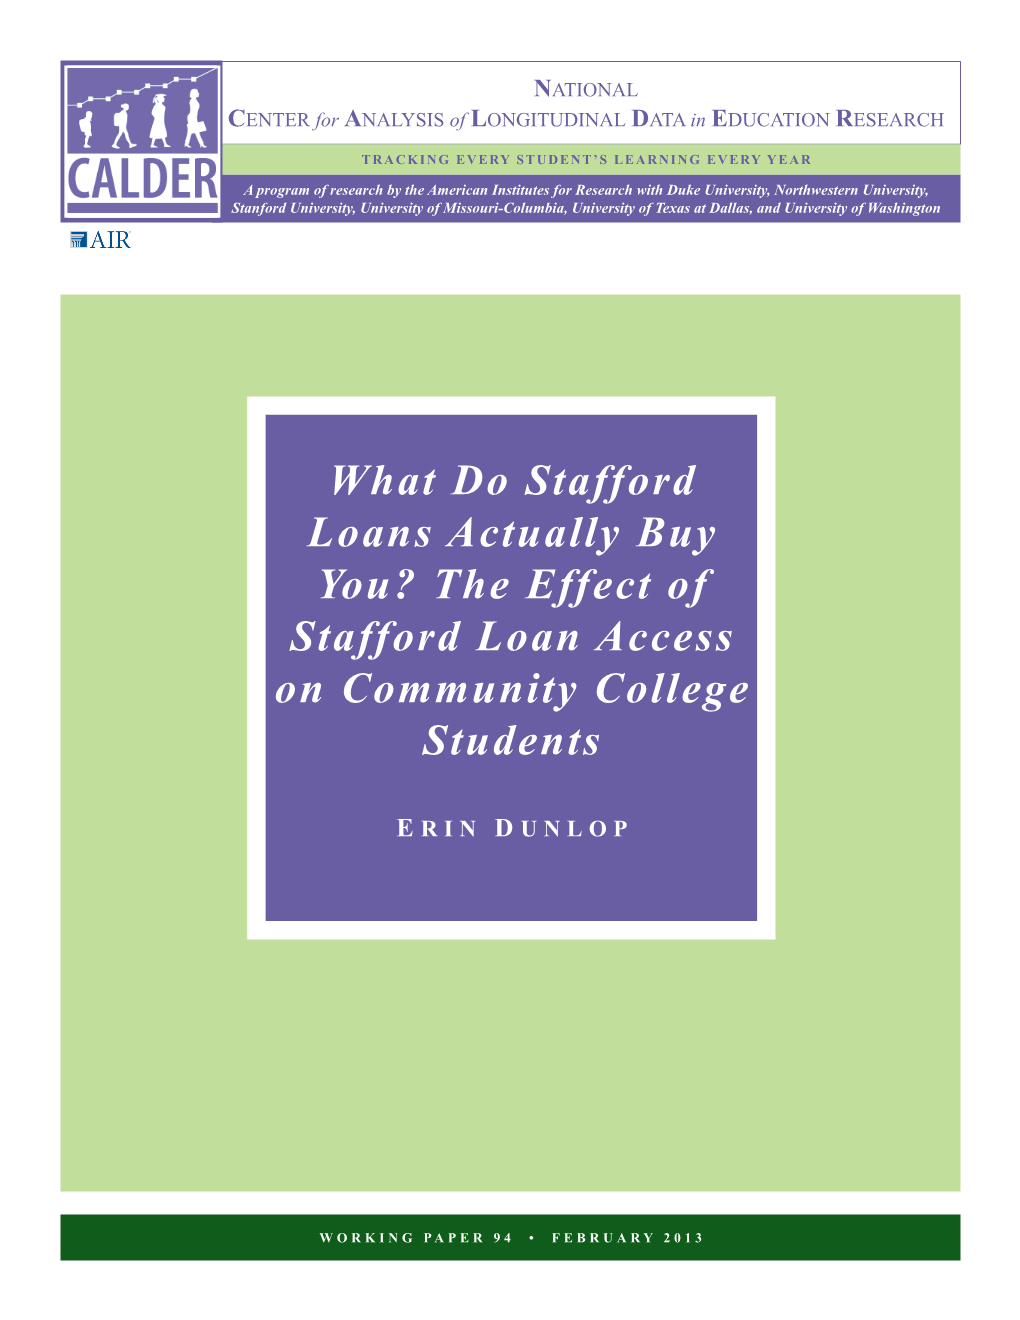 What Do Stafford Loans Actually Buy You? the Effect of Stafford Loan Access on Community College Students